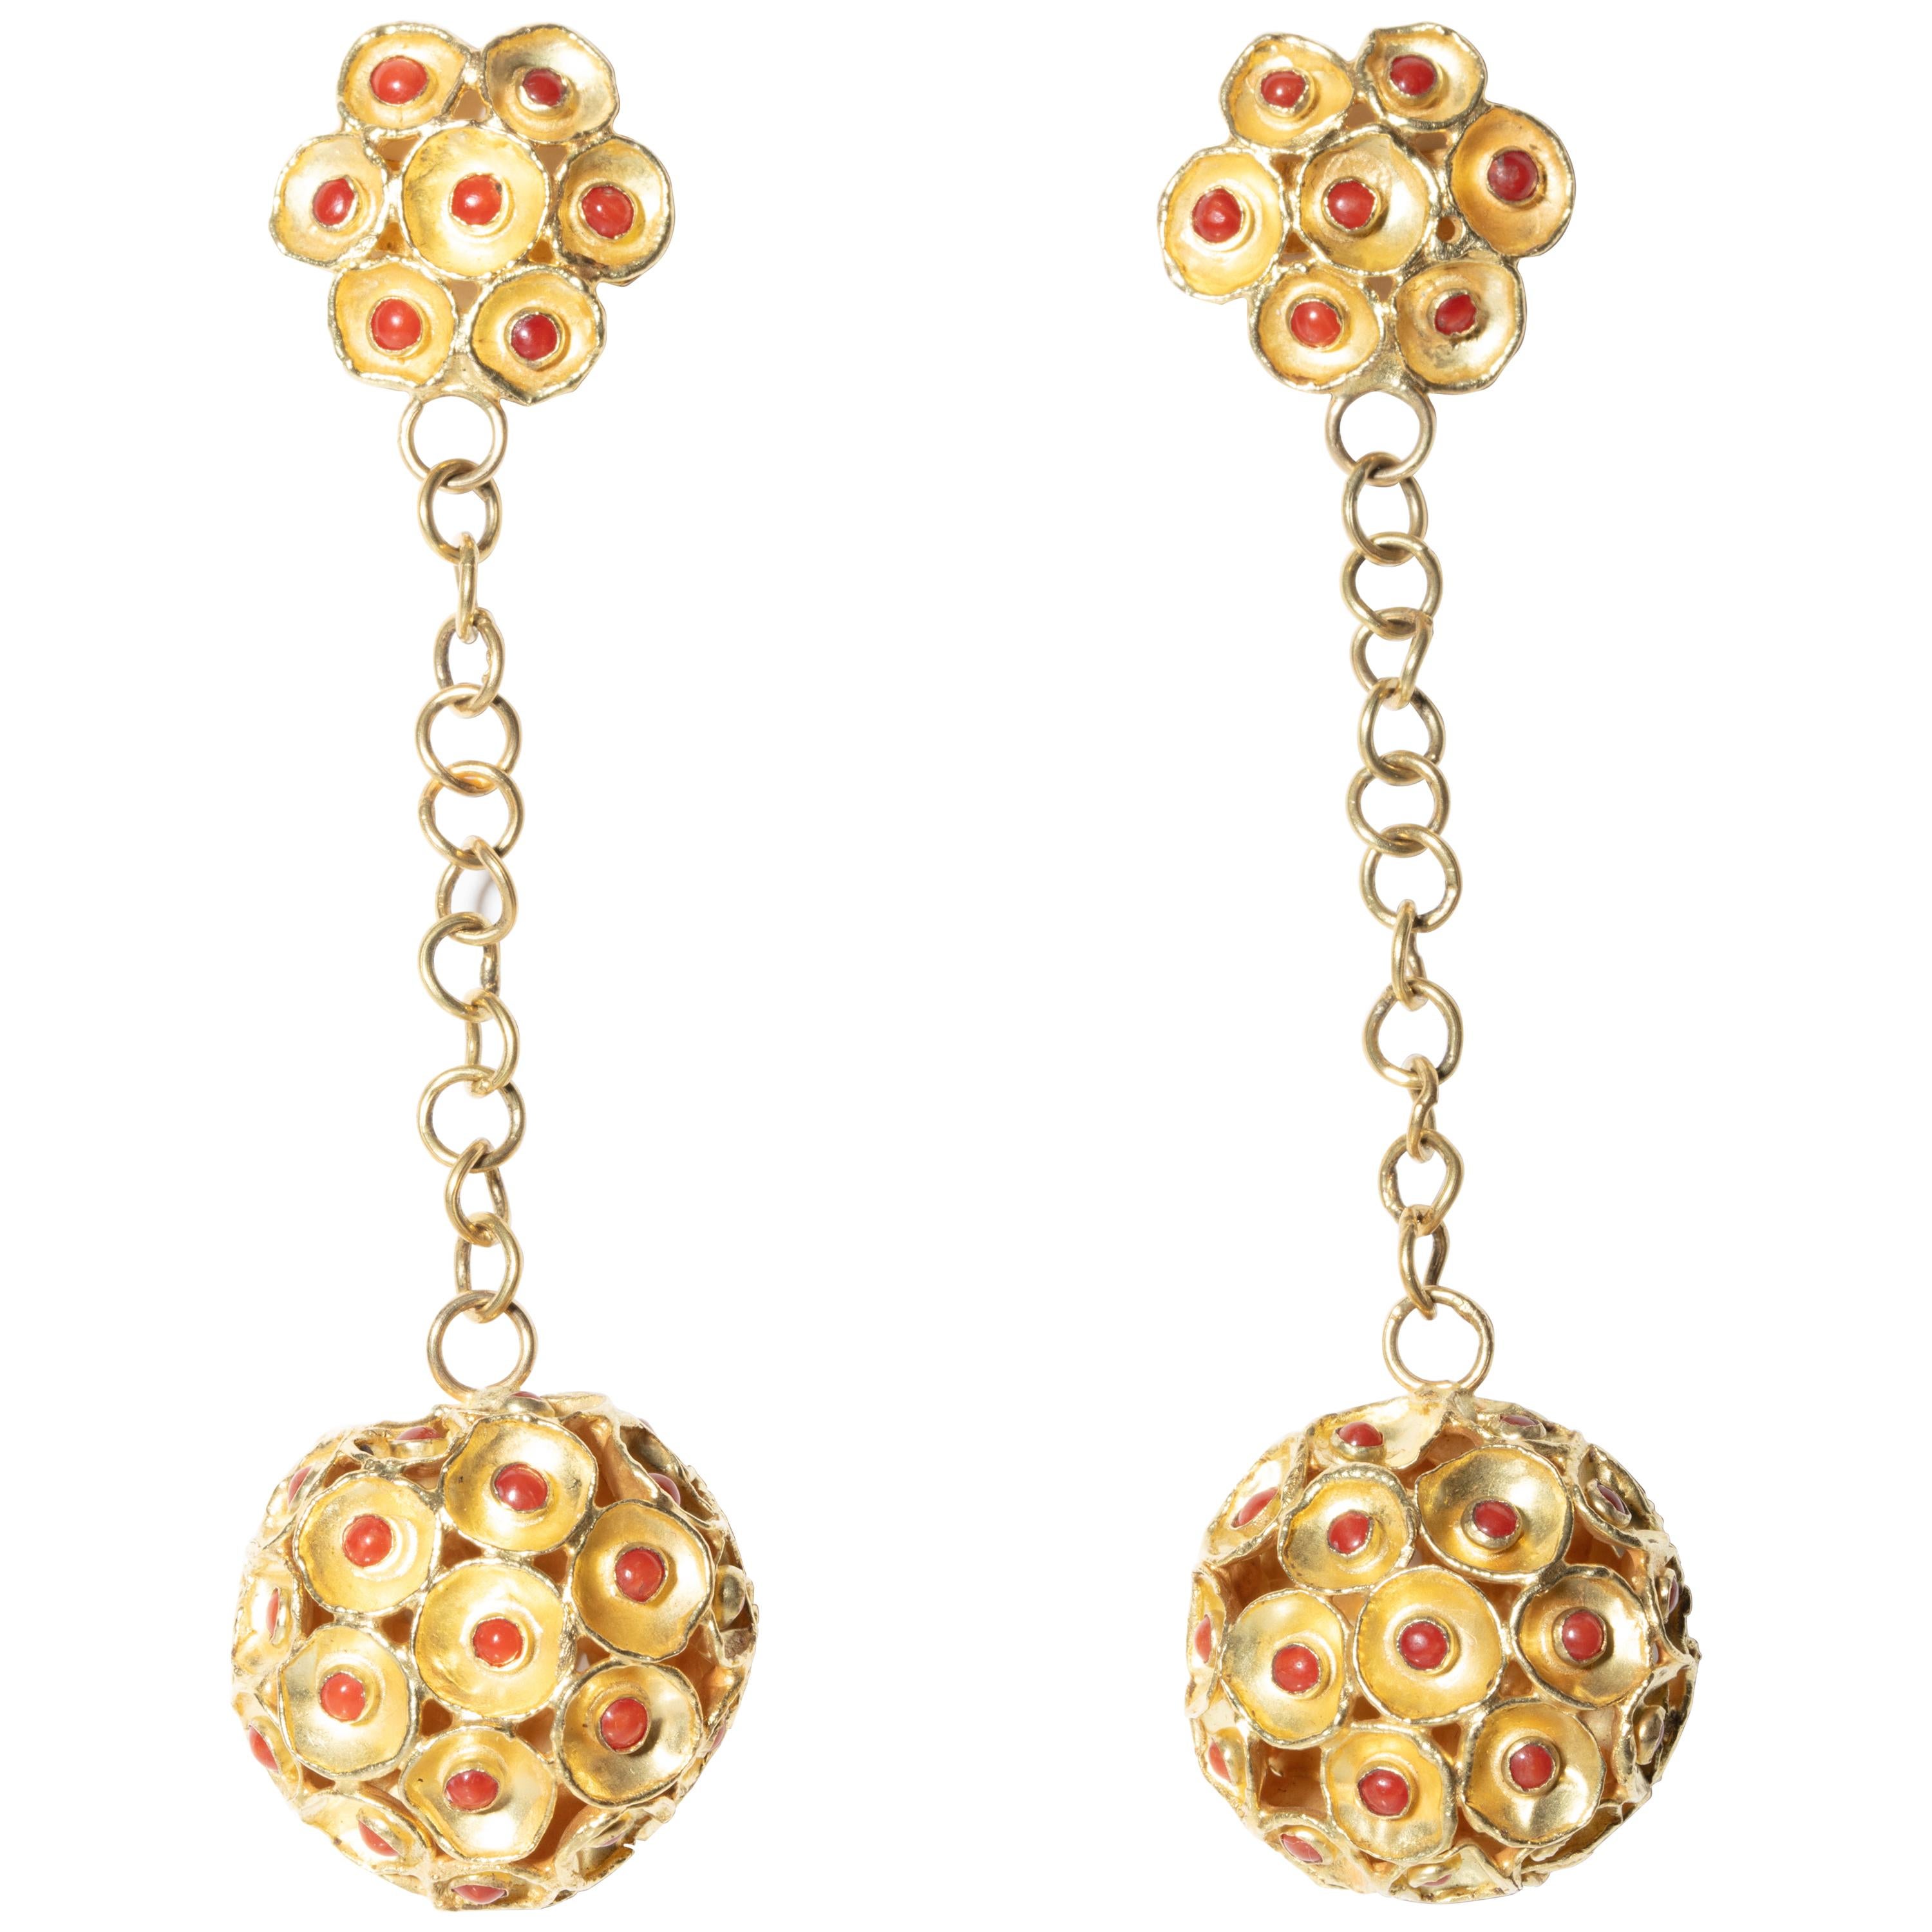 22 Karat Gold and Coral Drop Ball Chandelier Earrings